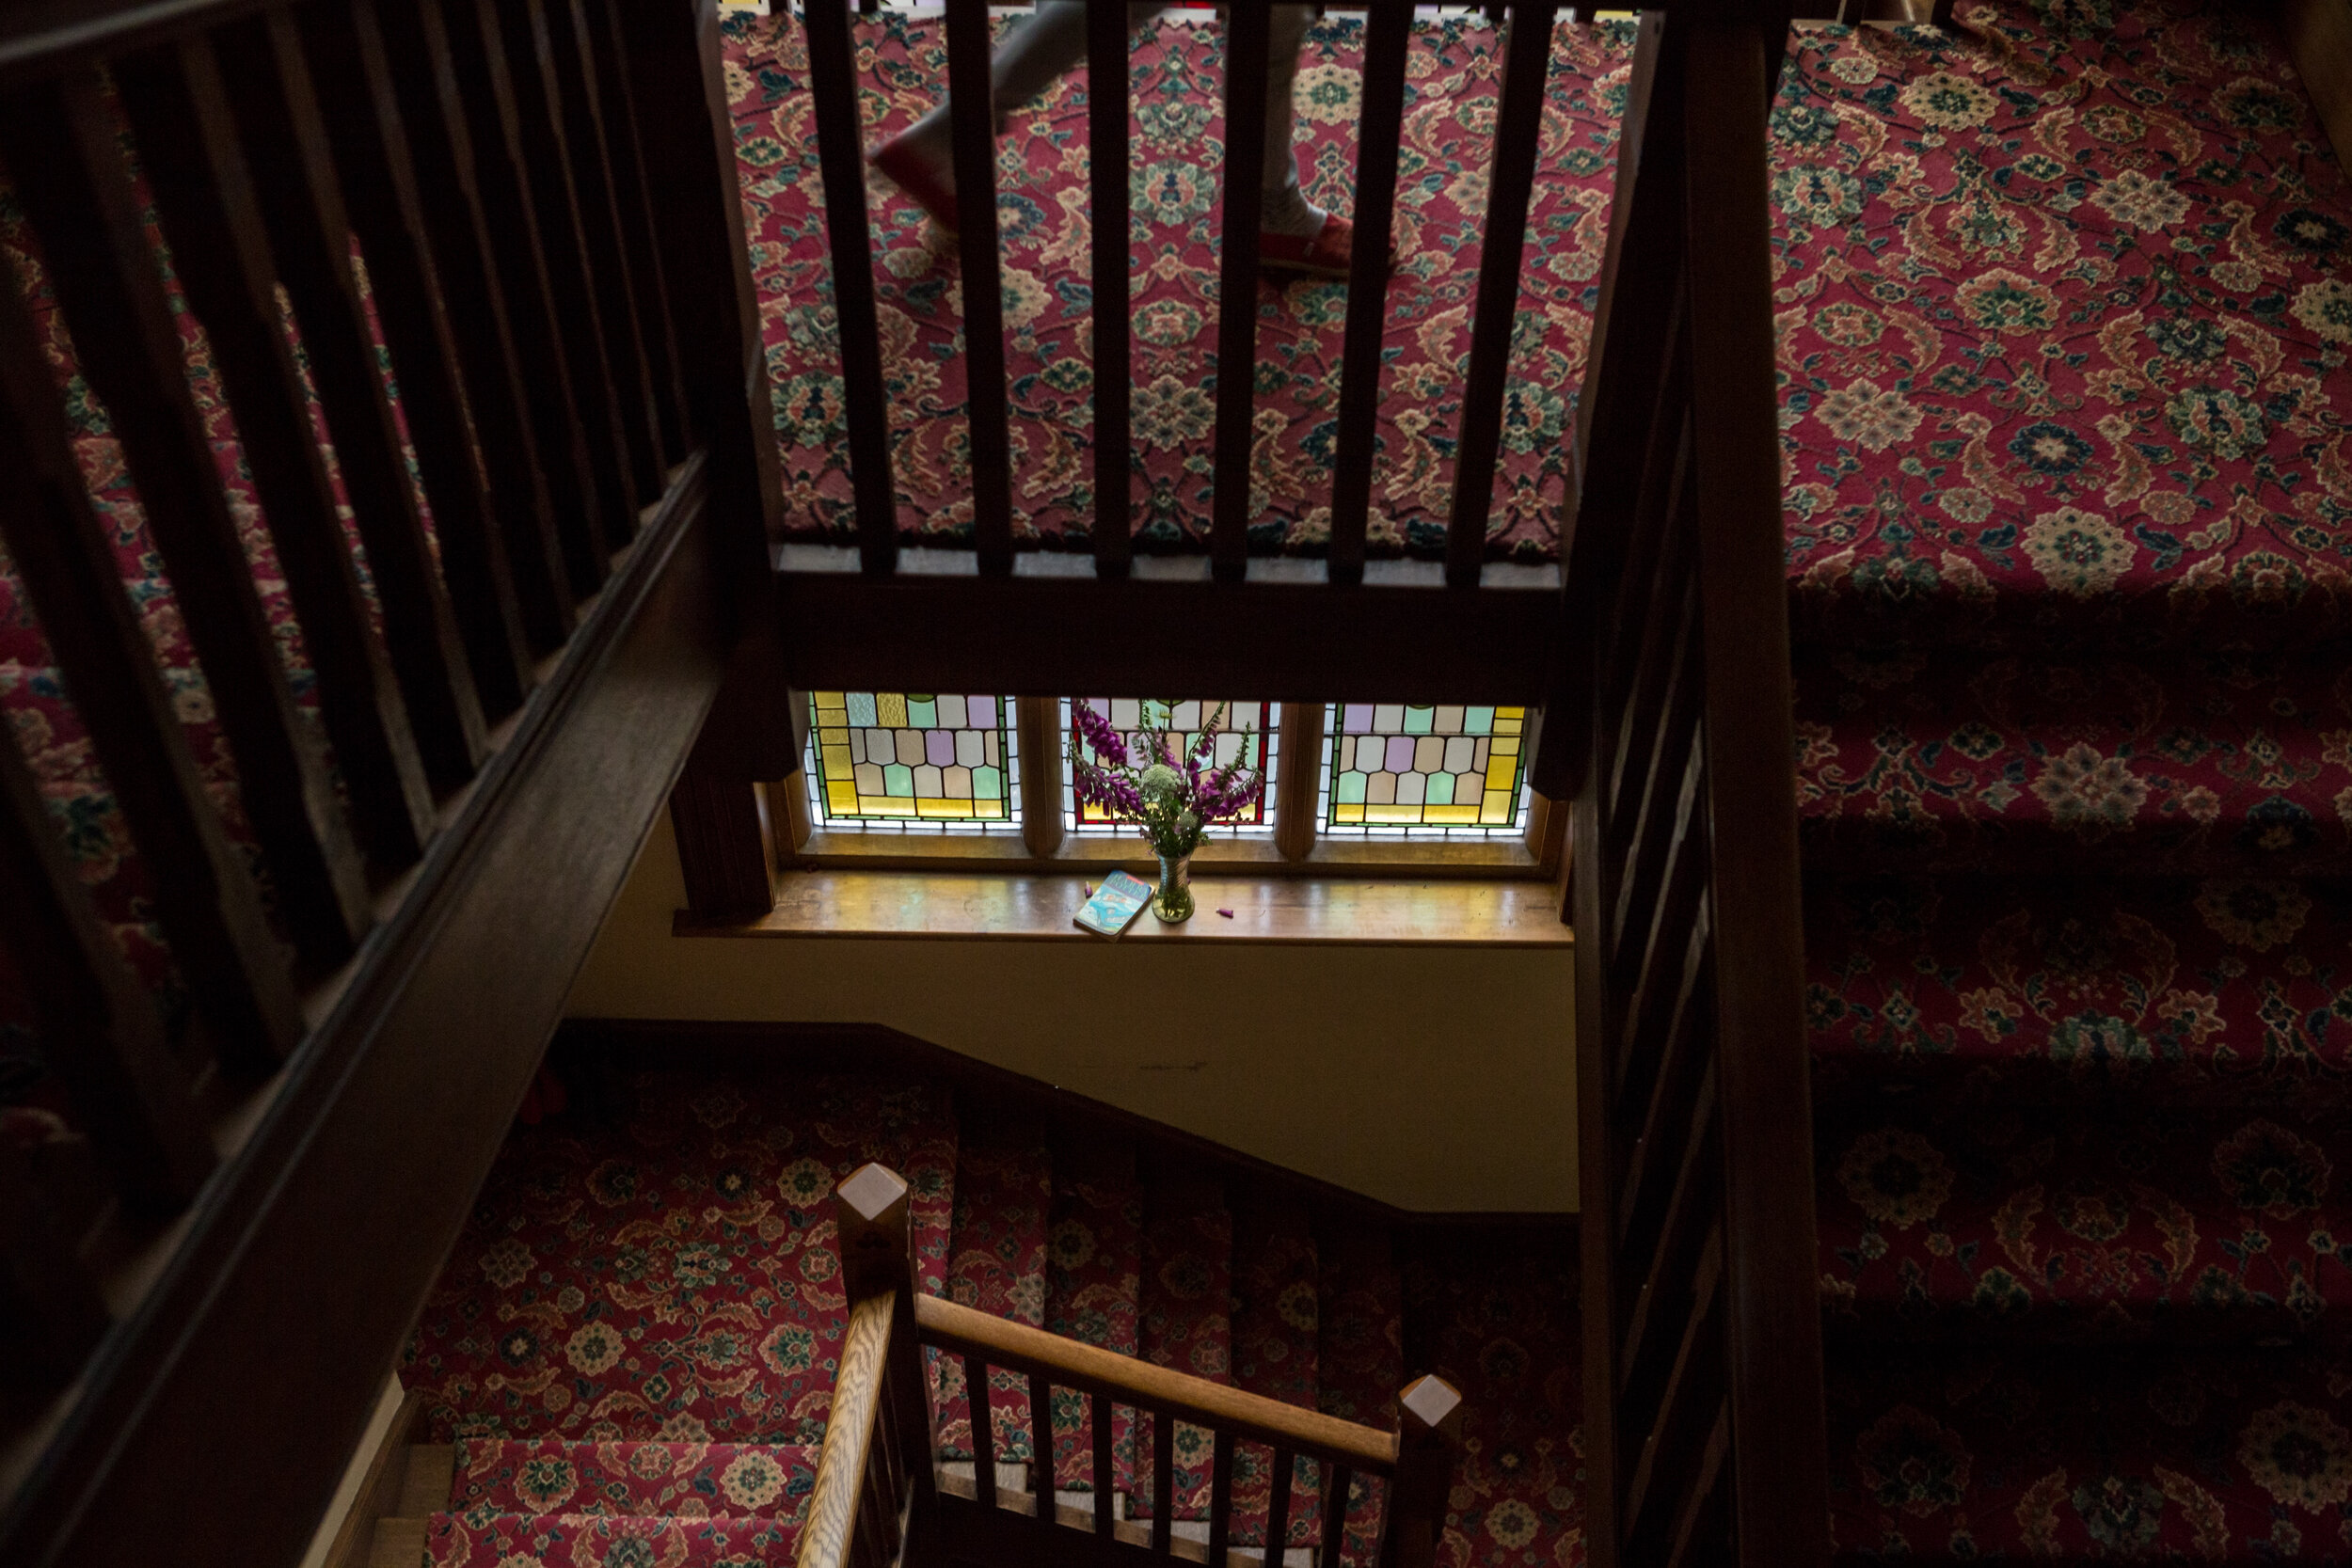 Descending (Main Hall Stairs), 2016